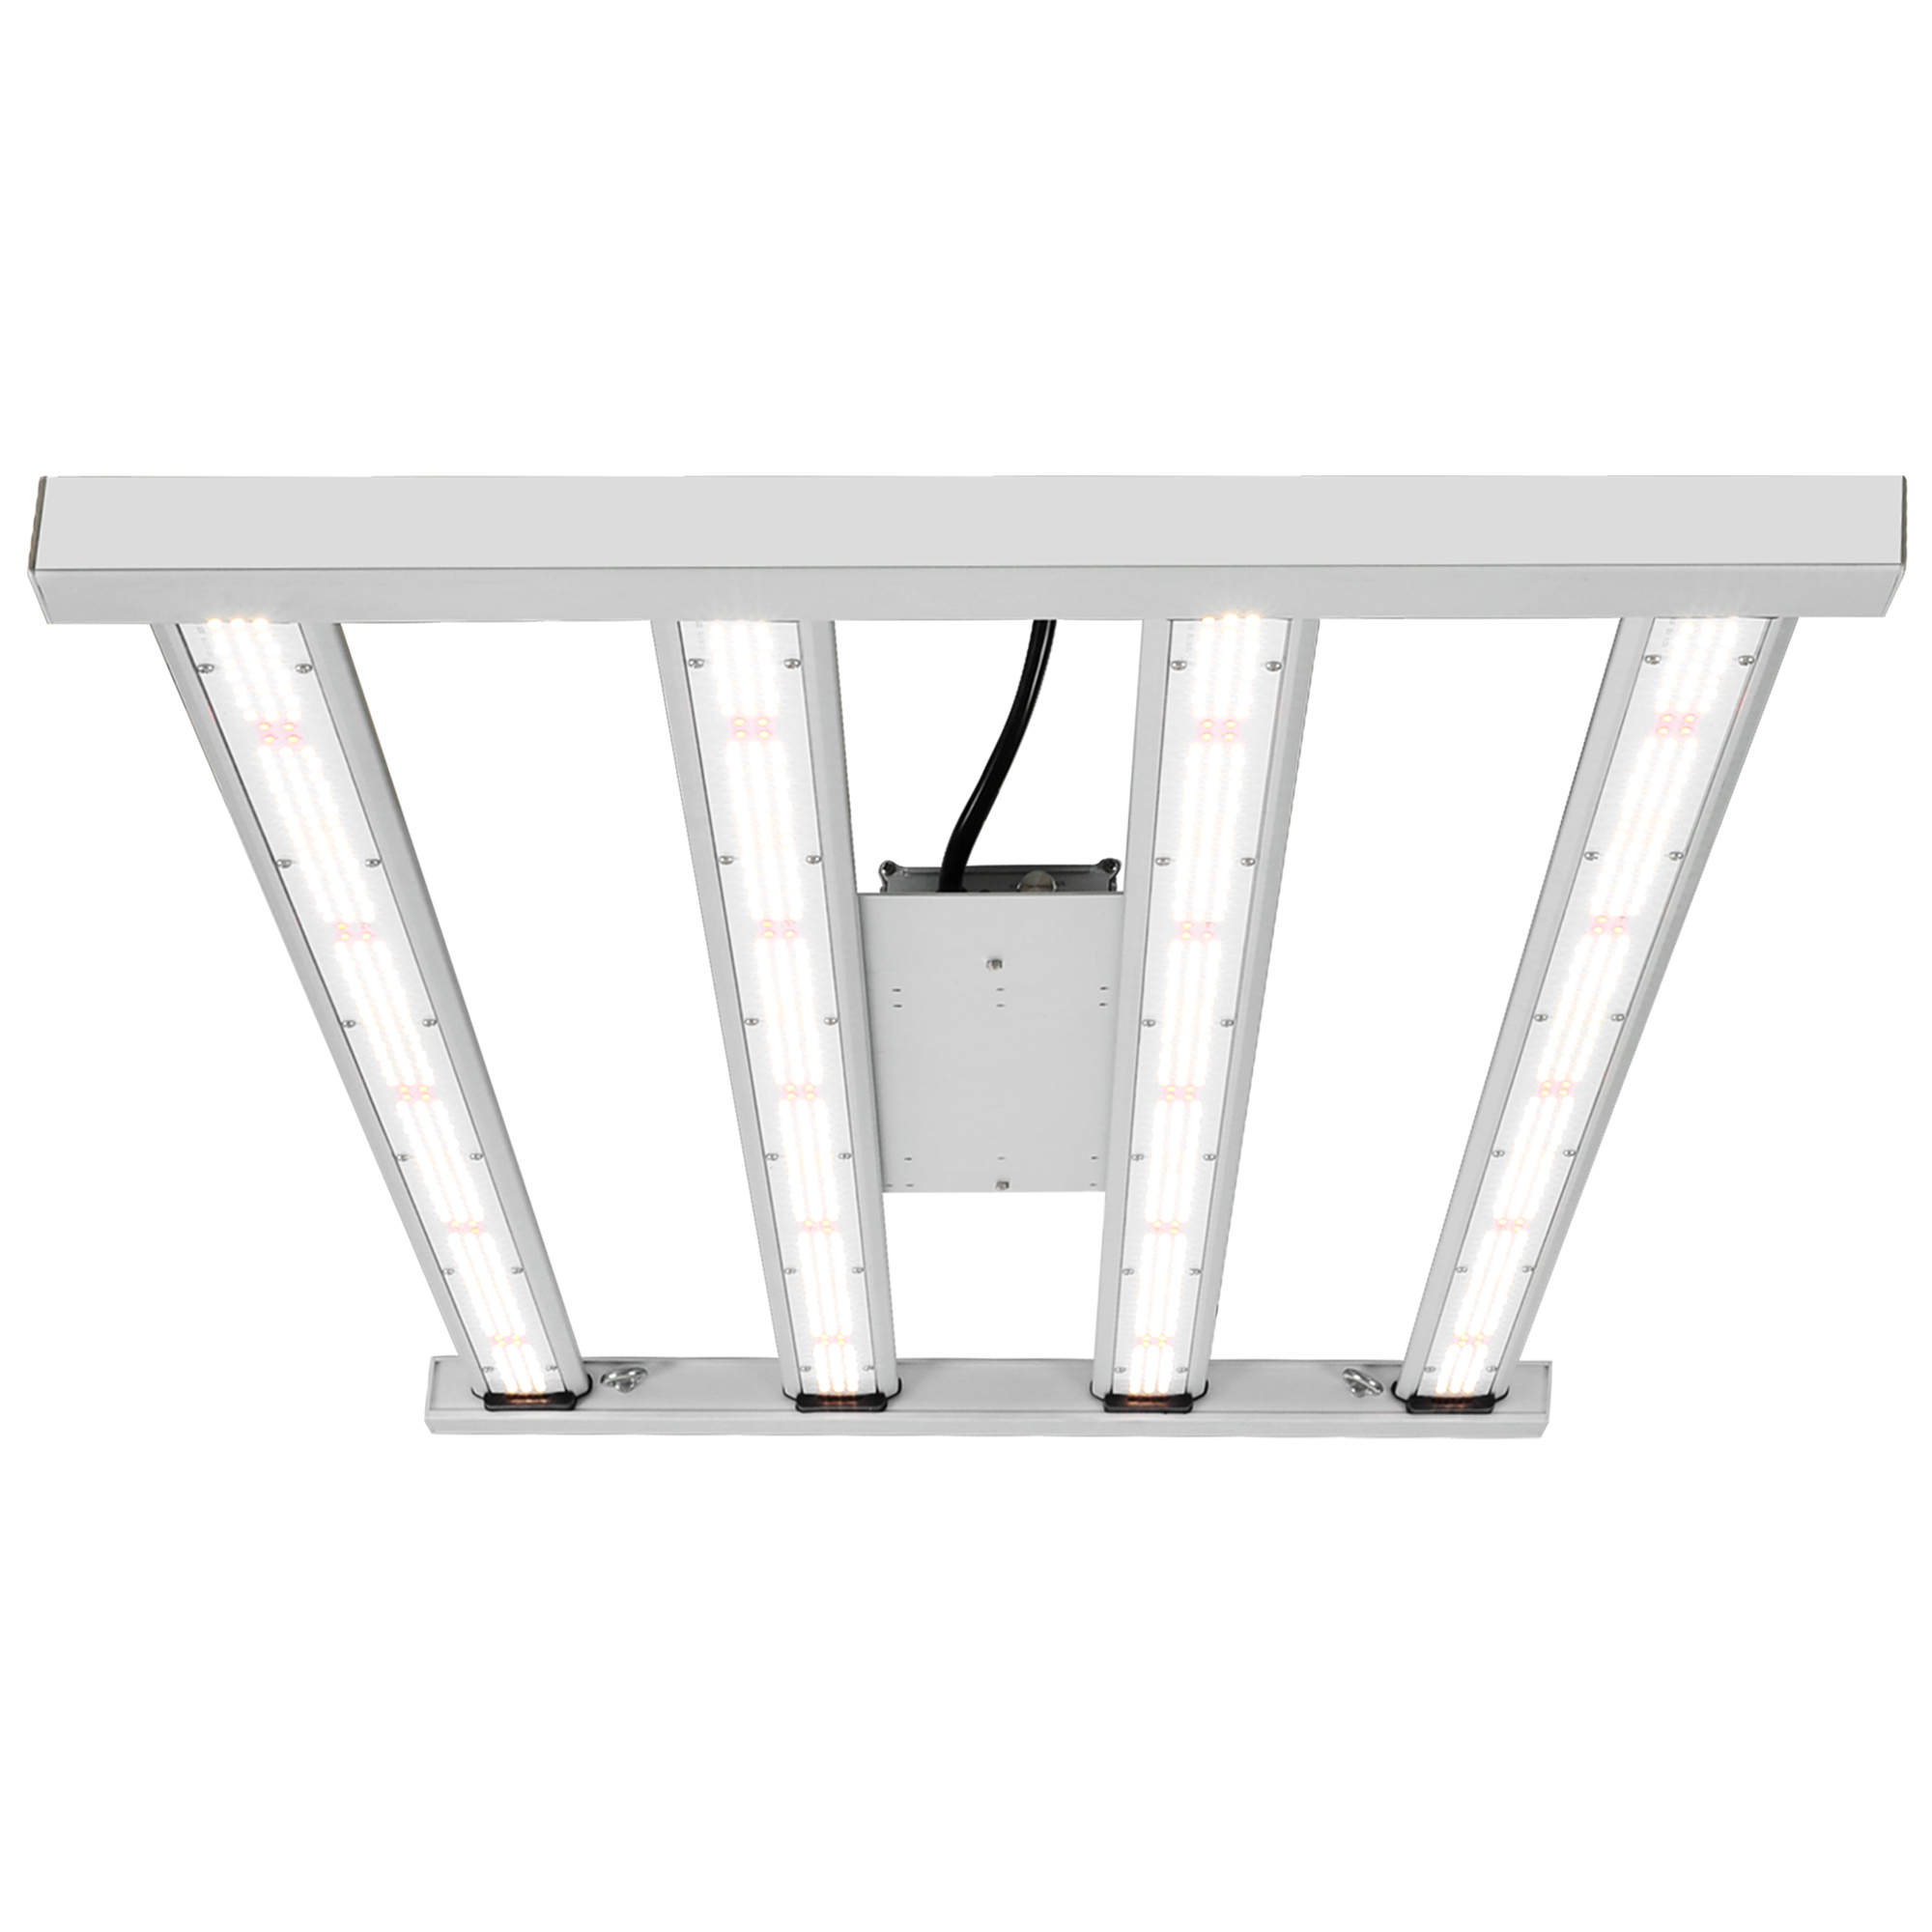 High Quality Efficient Bar LED Grow Light with Samsung Chips and Meanwell Driver